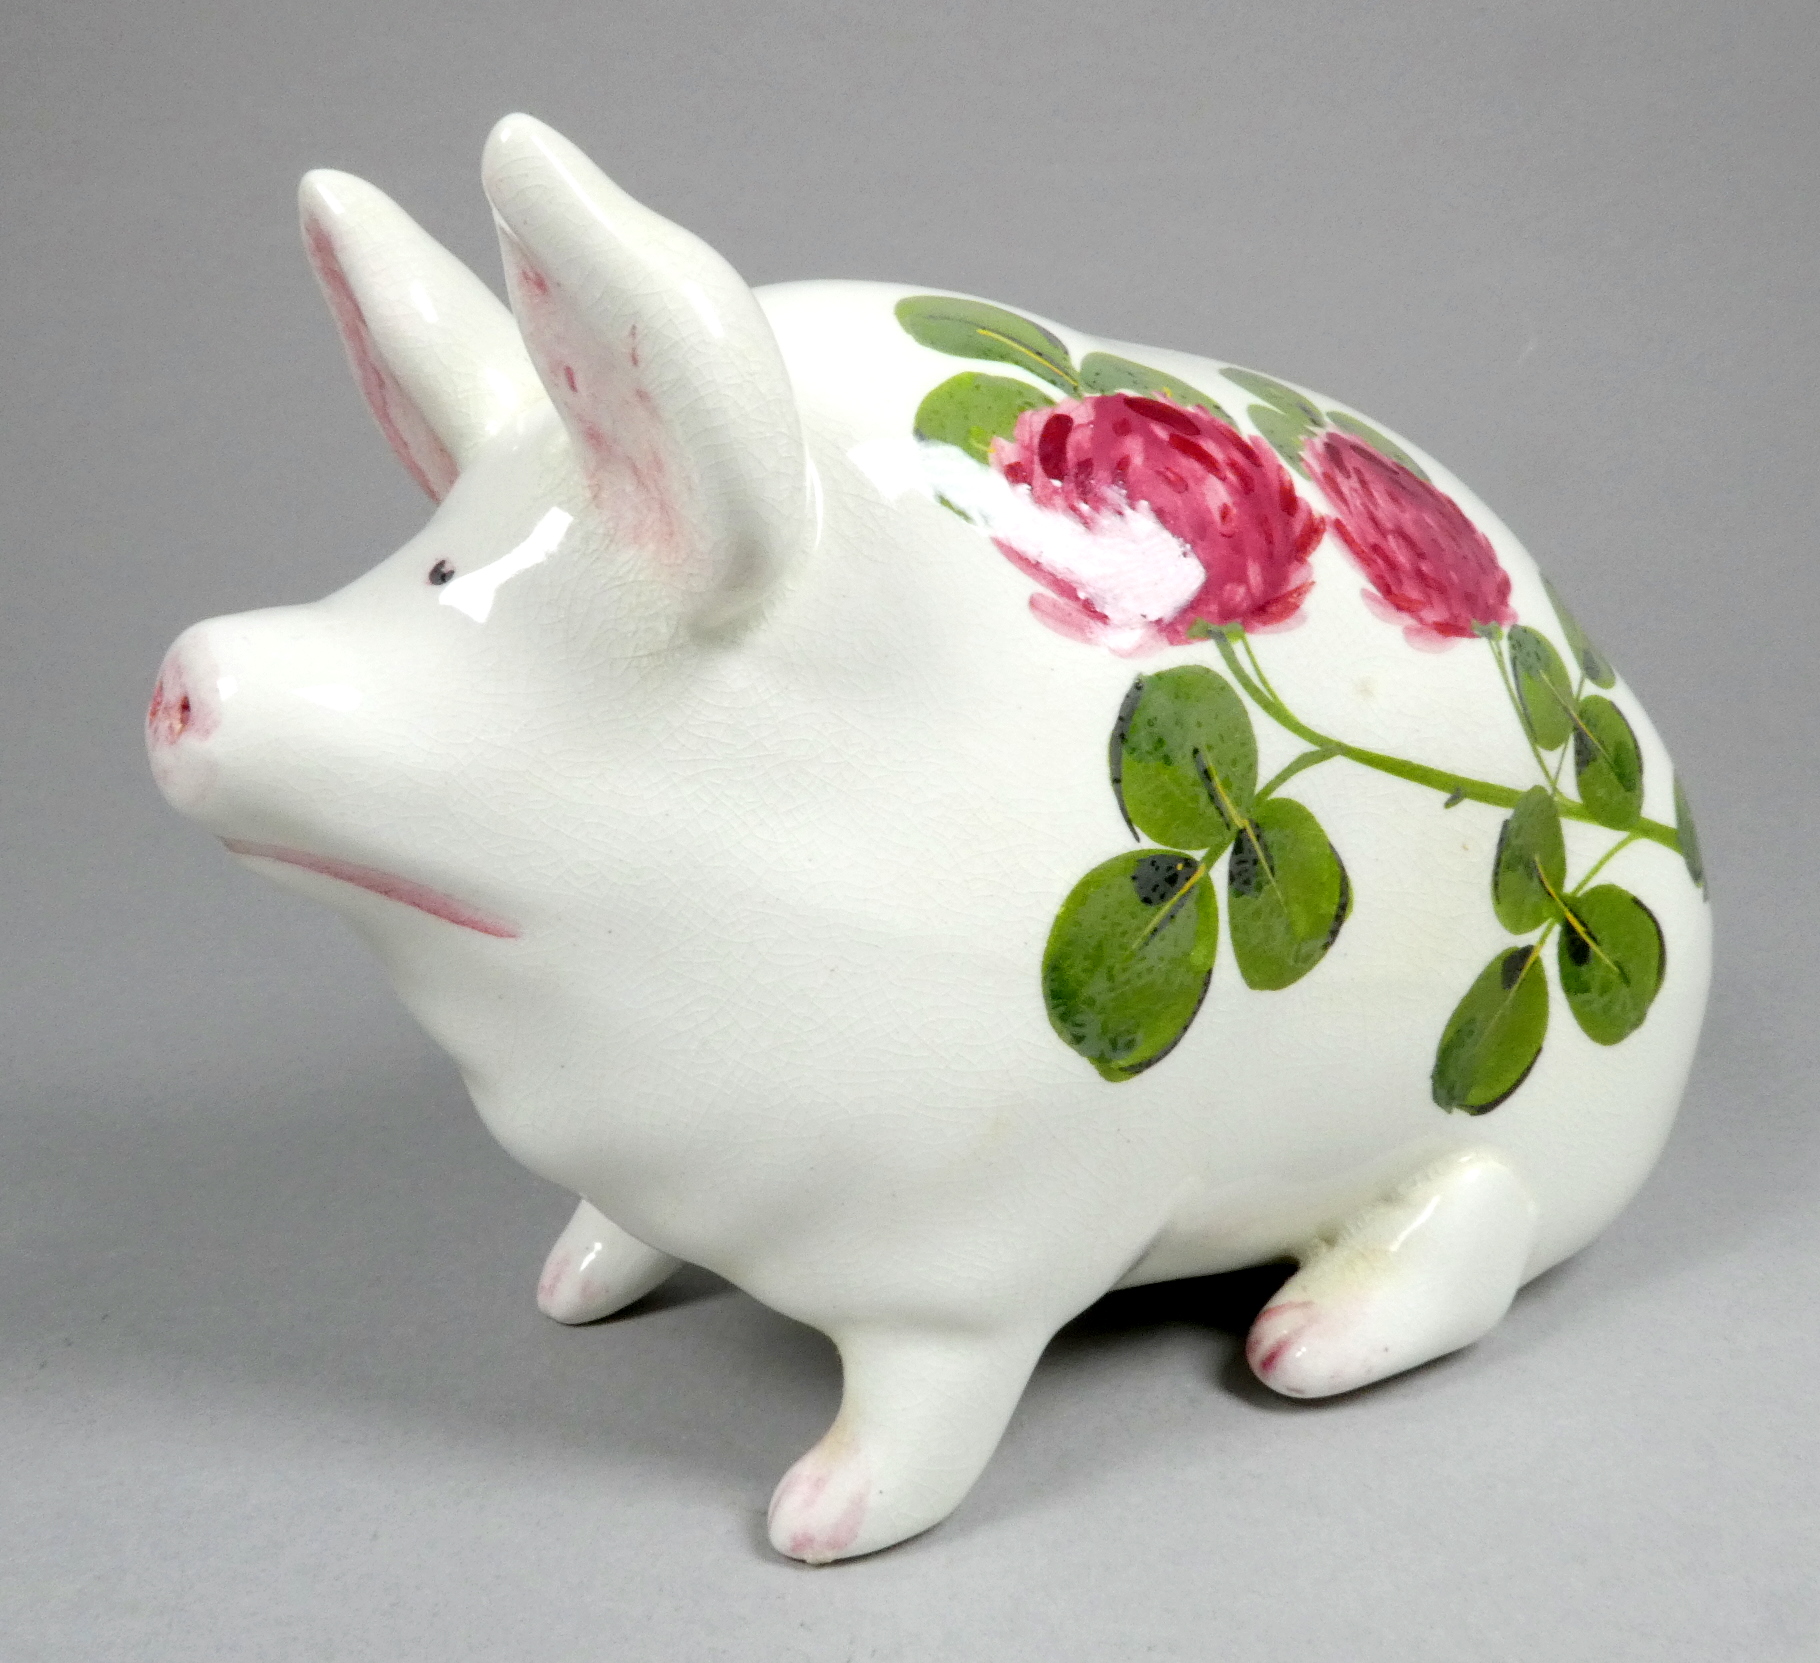 A Wemyss ware pottery pig - decorated with clover flowers, 17cm wide